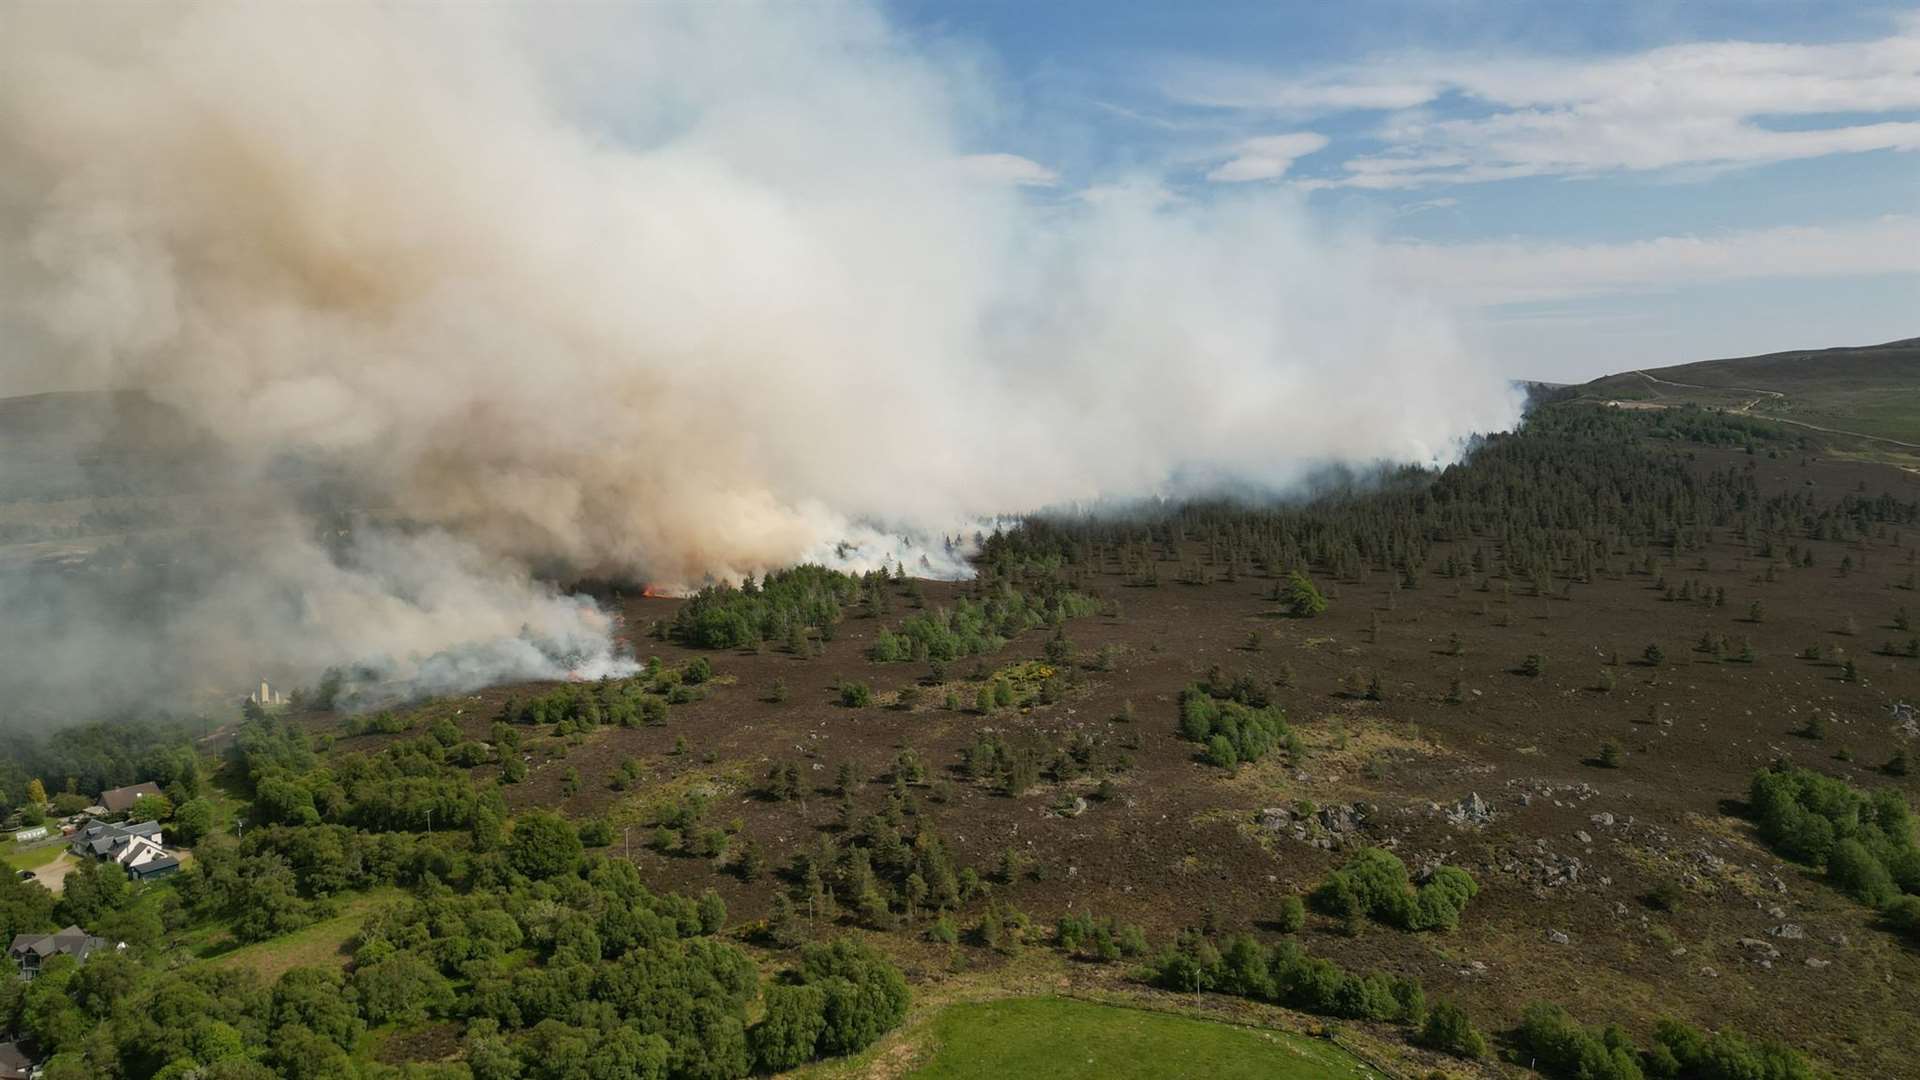 The extent of the wildfire in Daviot. Pictures: Gábor Barton.